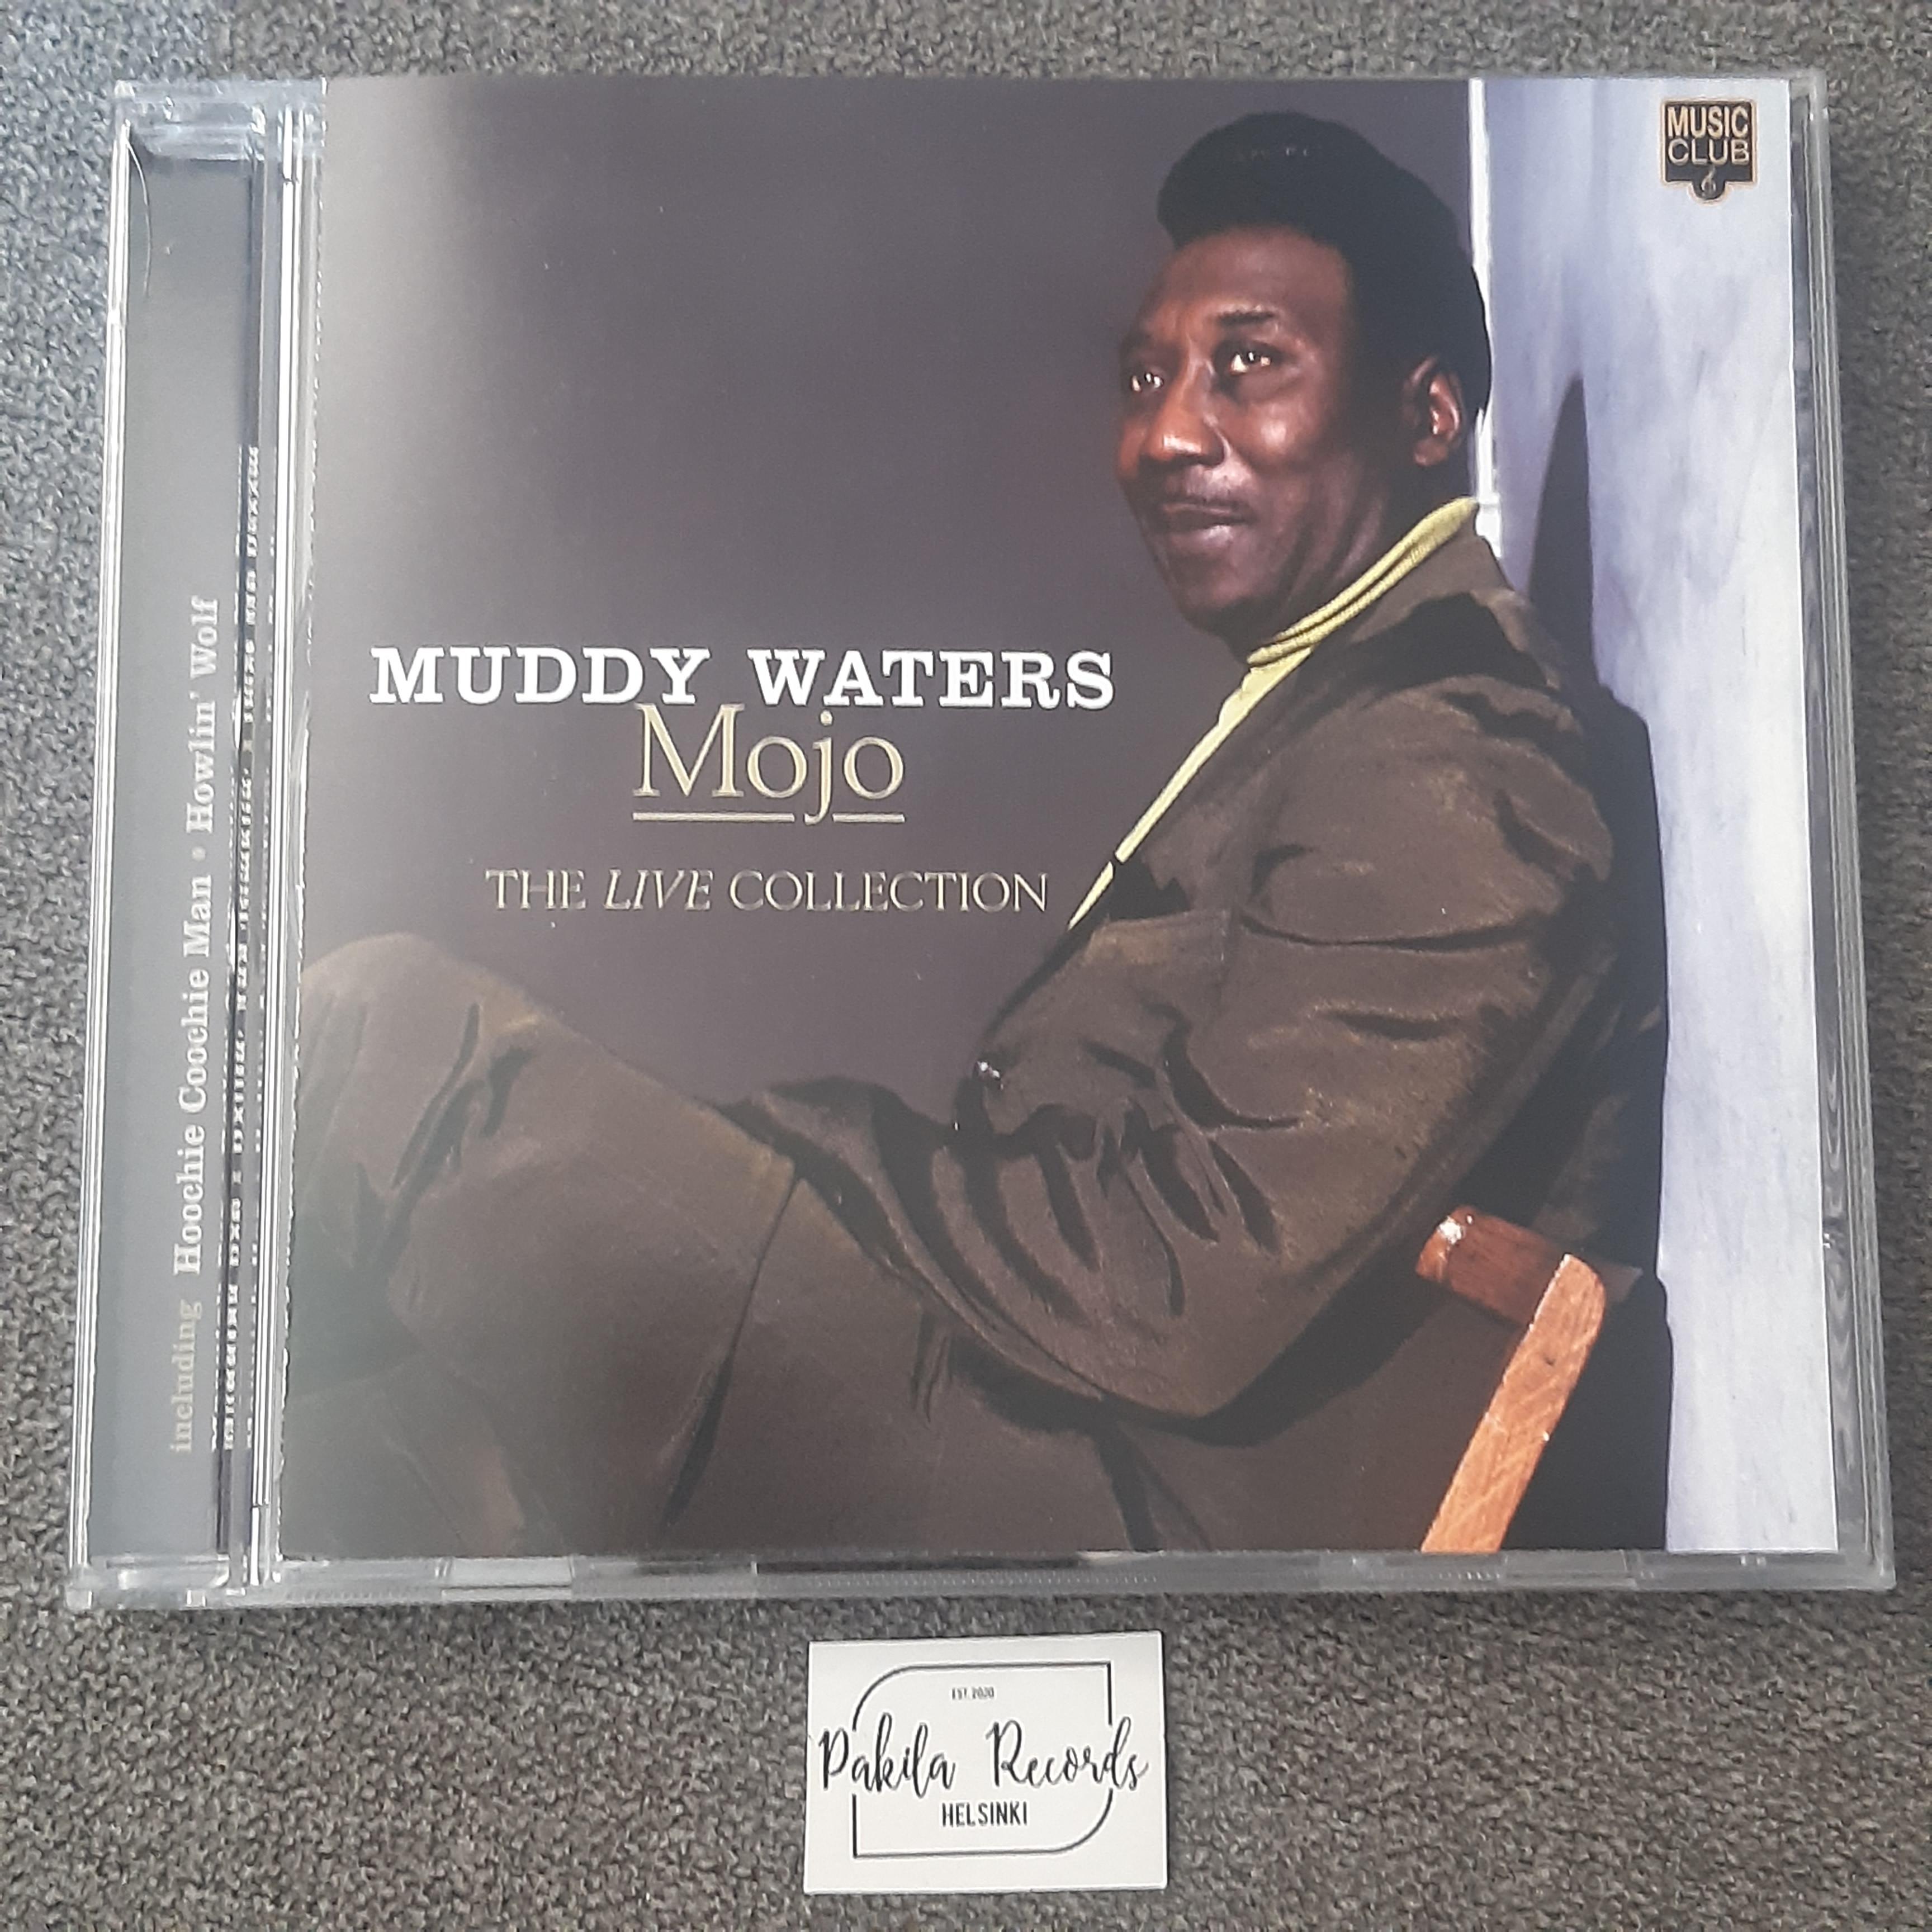 Muddy Waters - Mojo, The Live Collection - CD (käytetty)